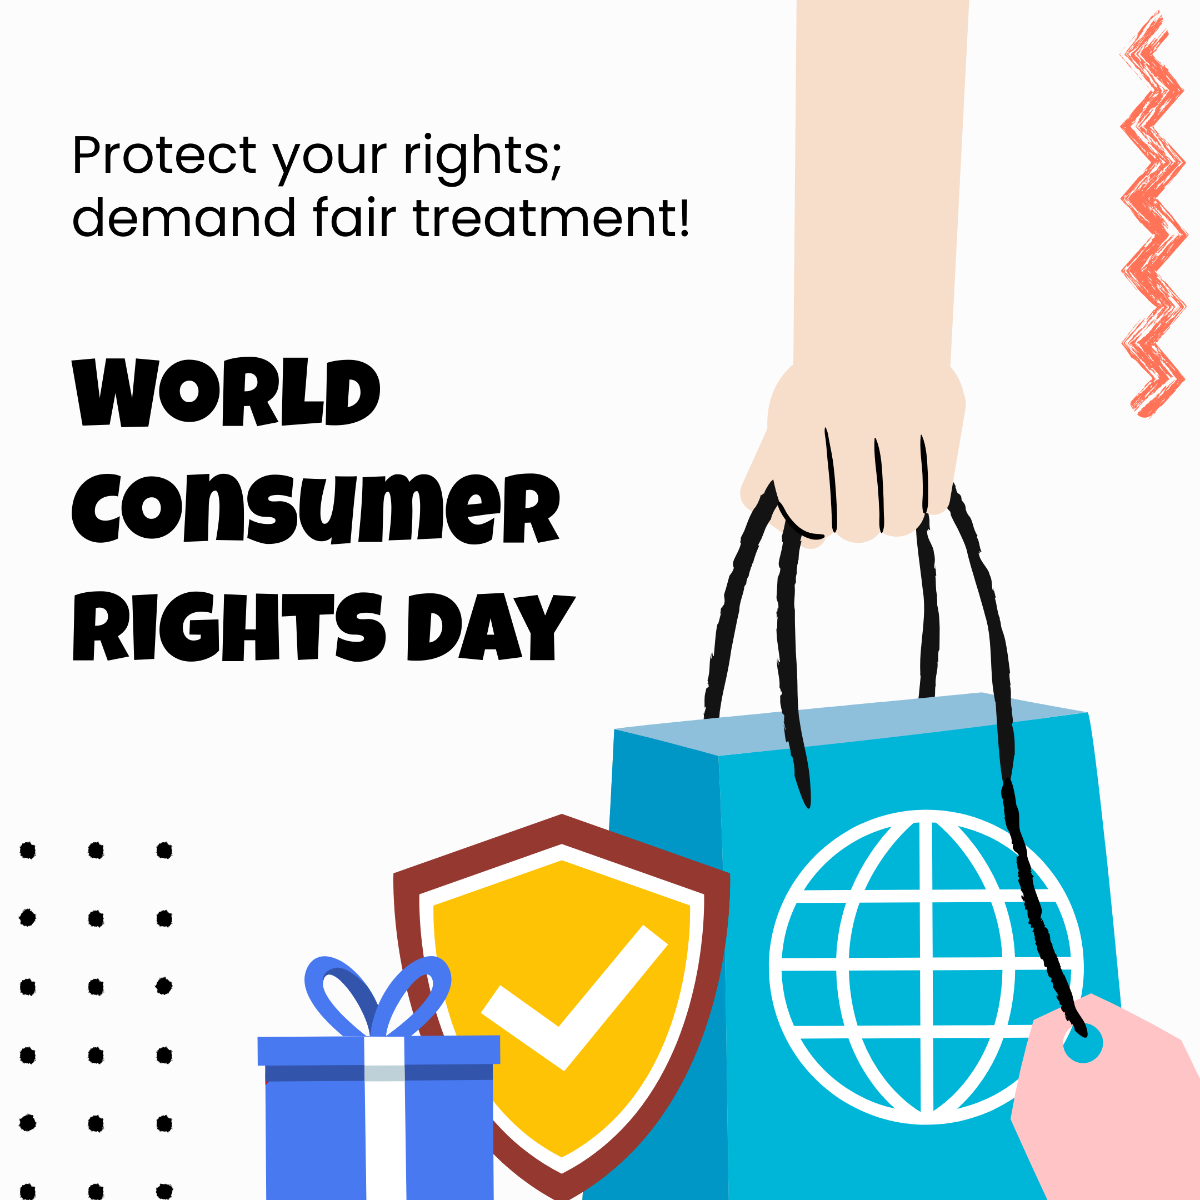 World Consumer Rights Day Instagram Post